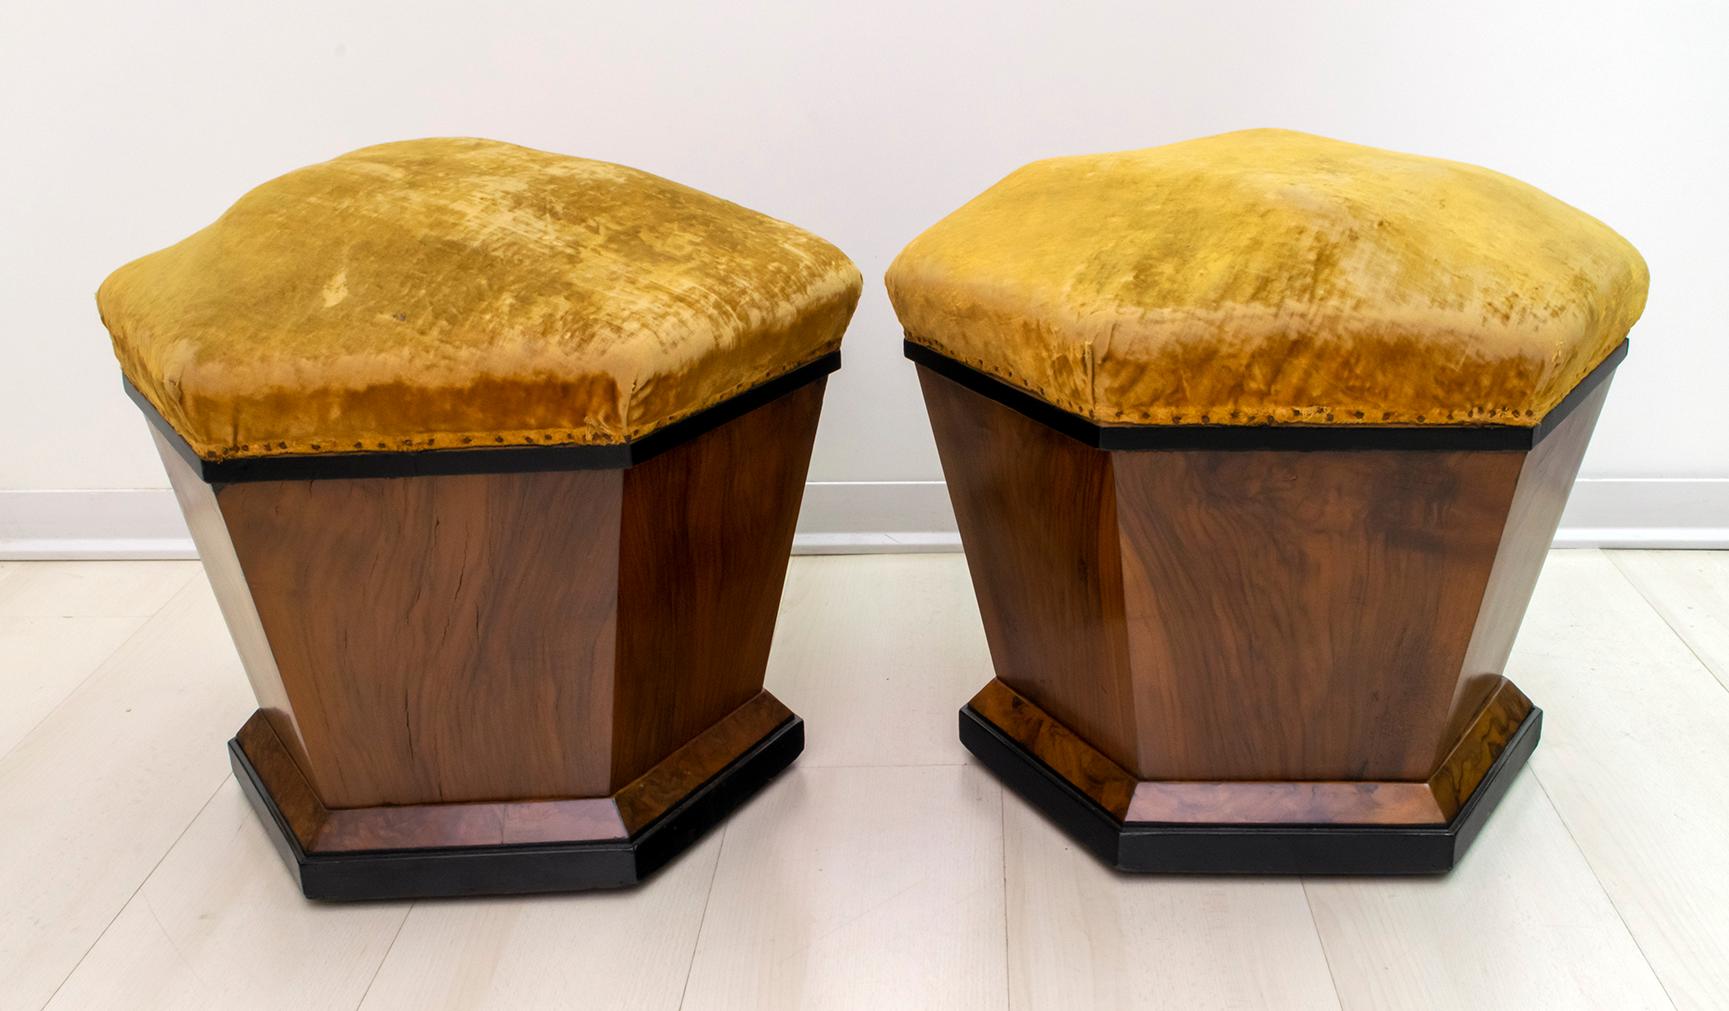 This pair of poufs was produced by Gaetano Borsani's Varedo atelier, father of the famous design Osvaldo Borsani, in Italy in the 1920s, during the Art Deco period. The poufs are in walnut veneered beech and parts in ebonized wood, to be